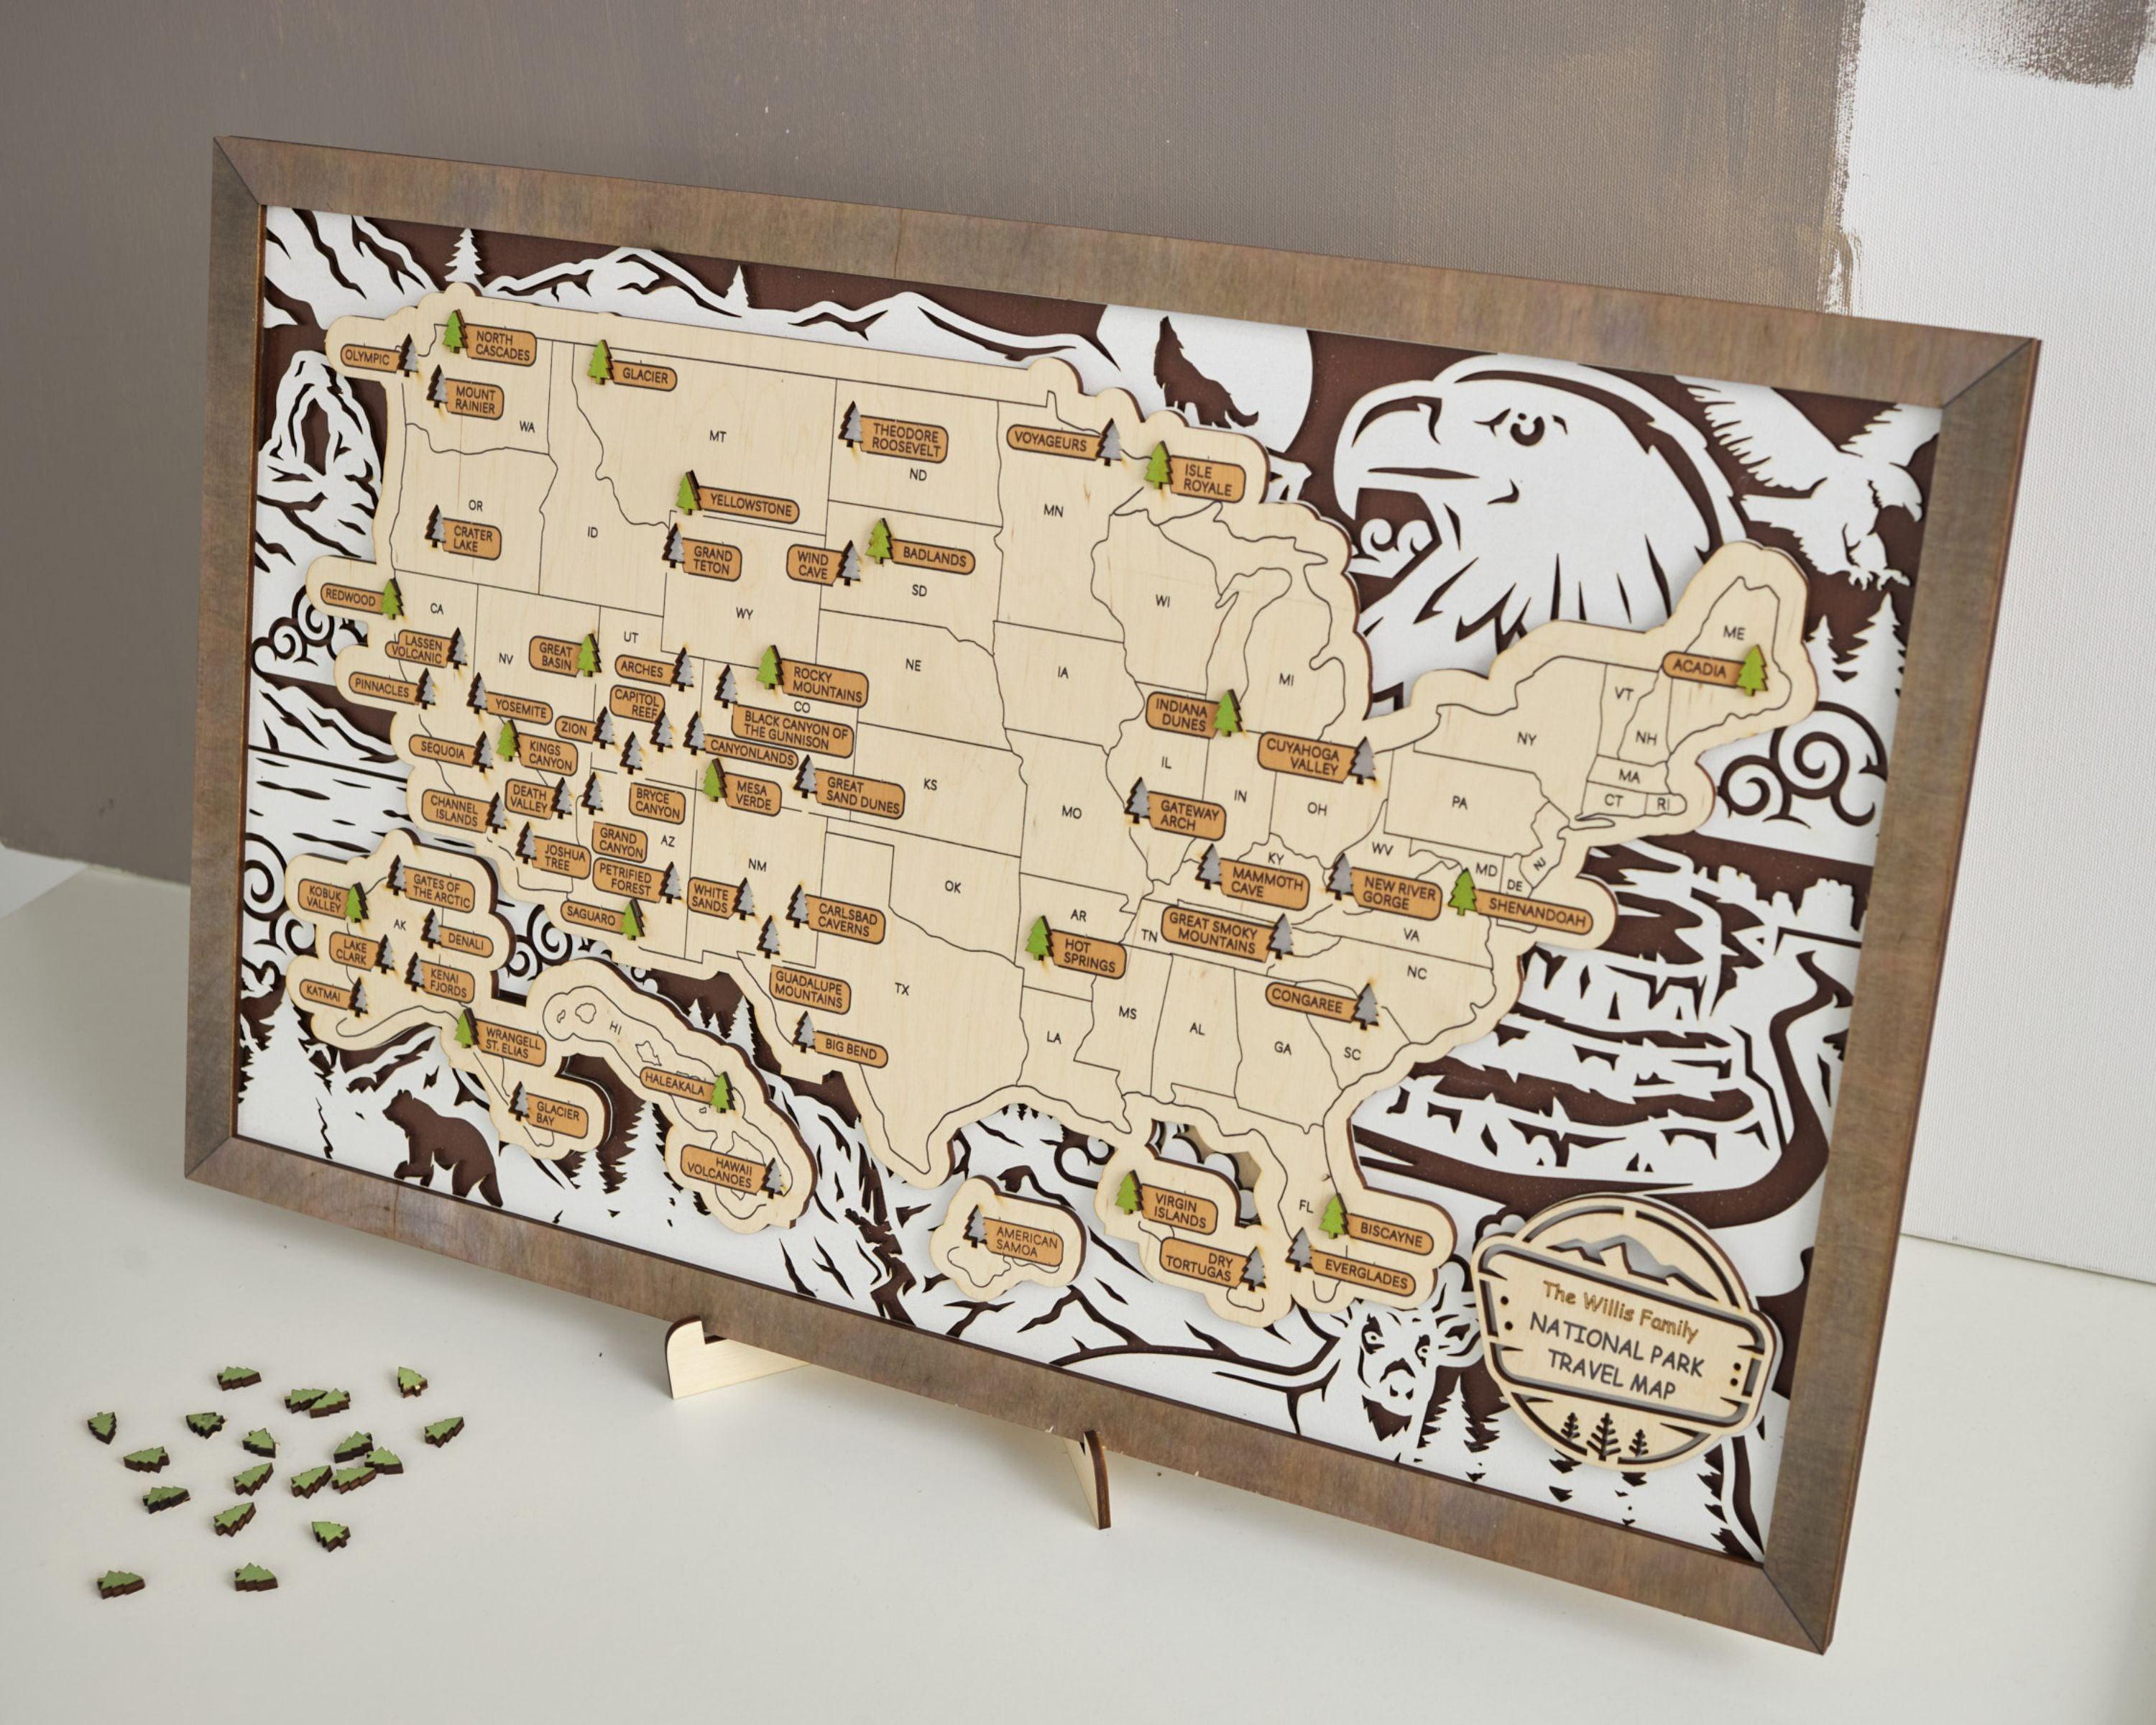 US 3D Wooden National Parks Travel Map With Trees To Record Park Visits (Wildlife Design) - Lemap